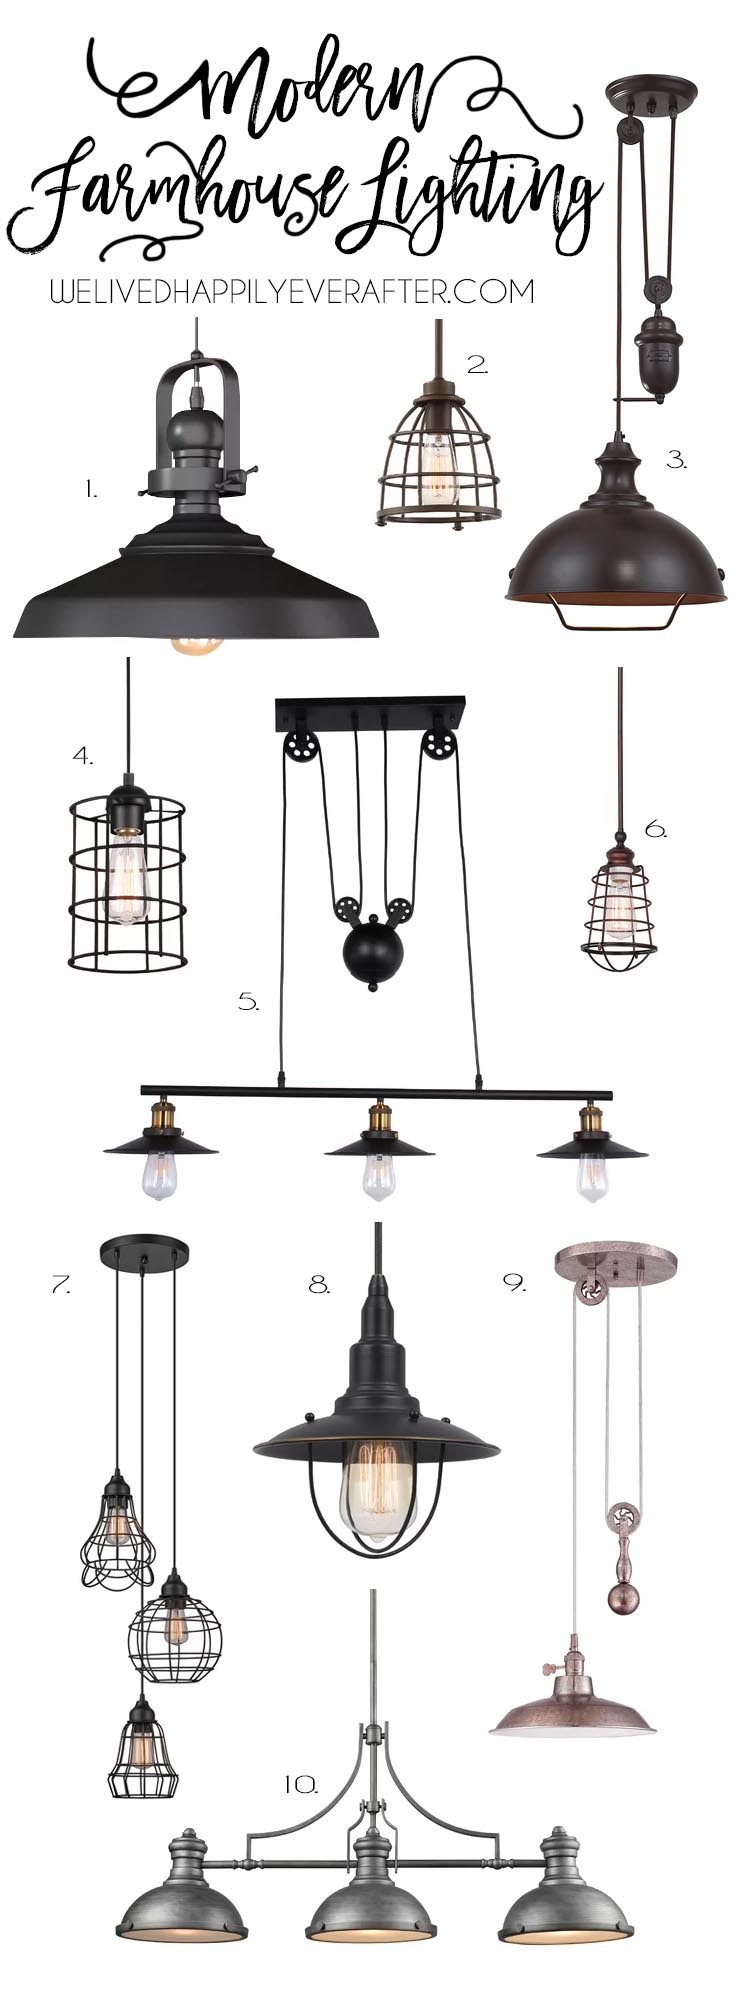 Rustic Industrial Modern Farmhouse Metal Lighting For Your Home Decor